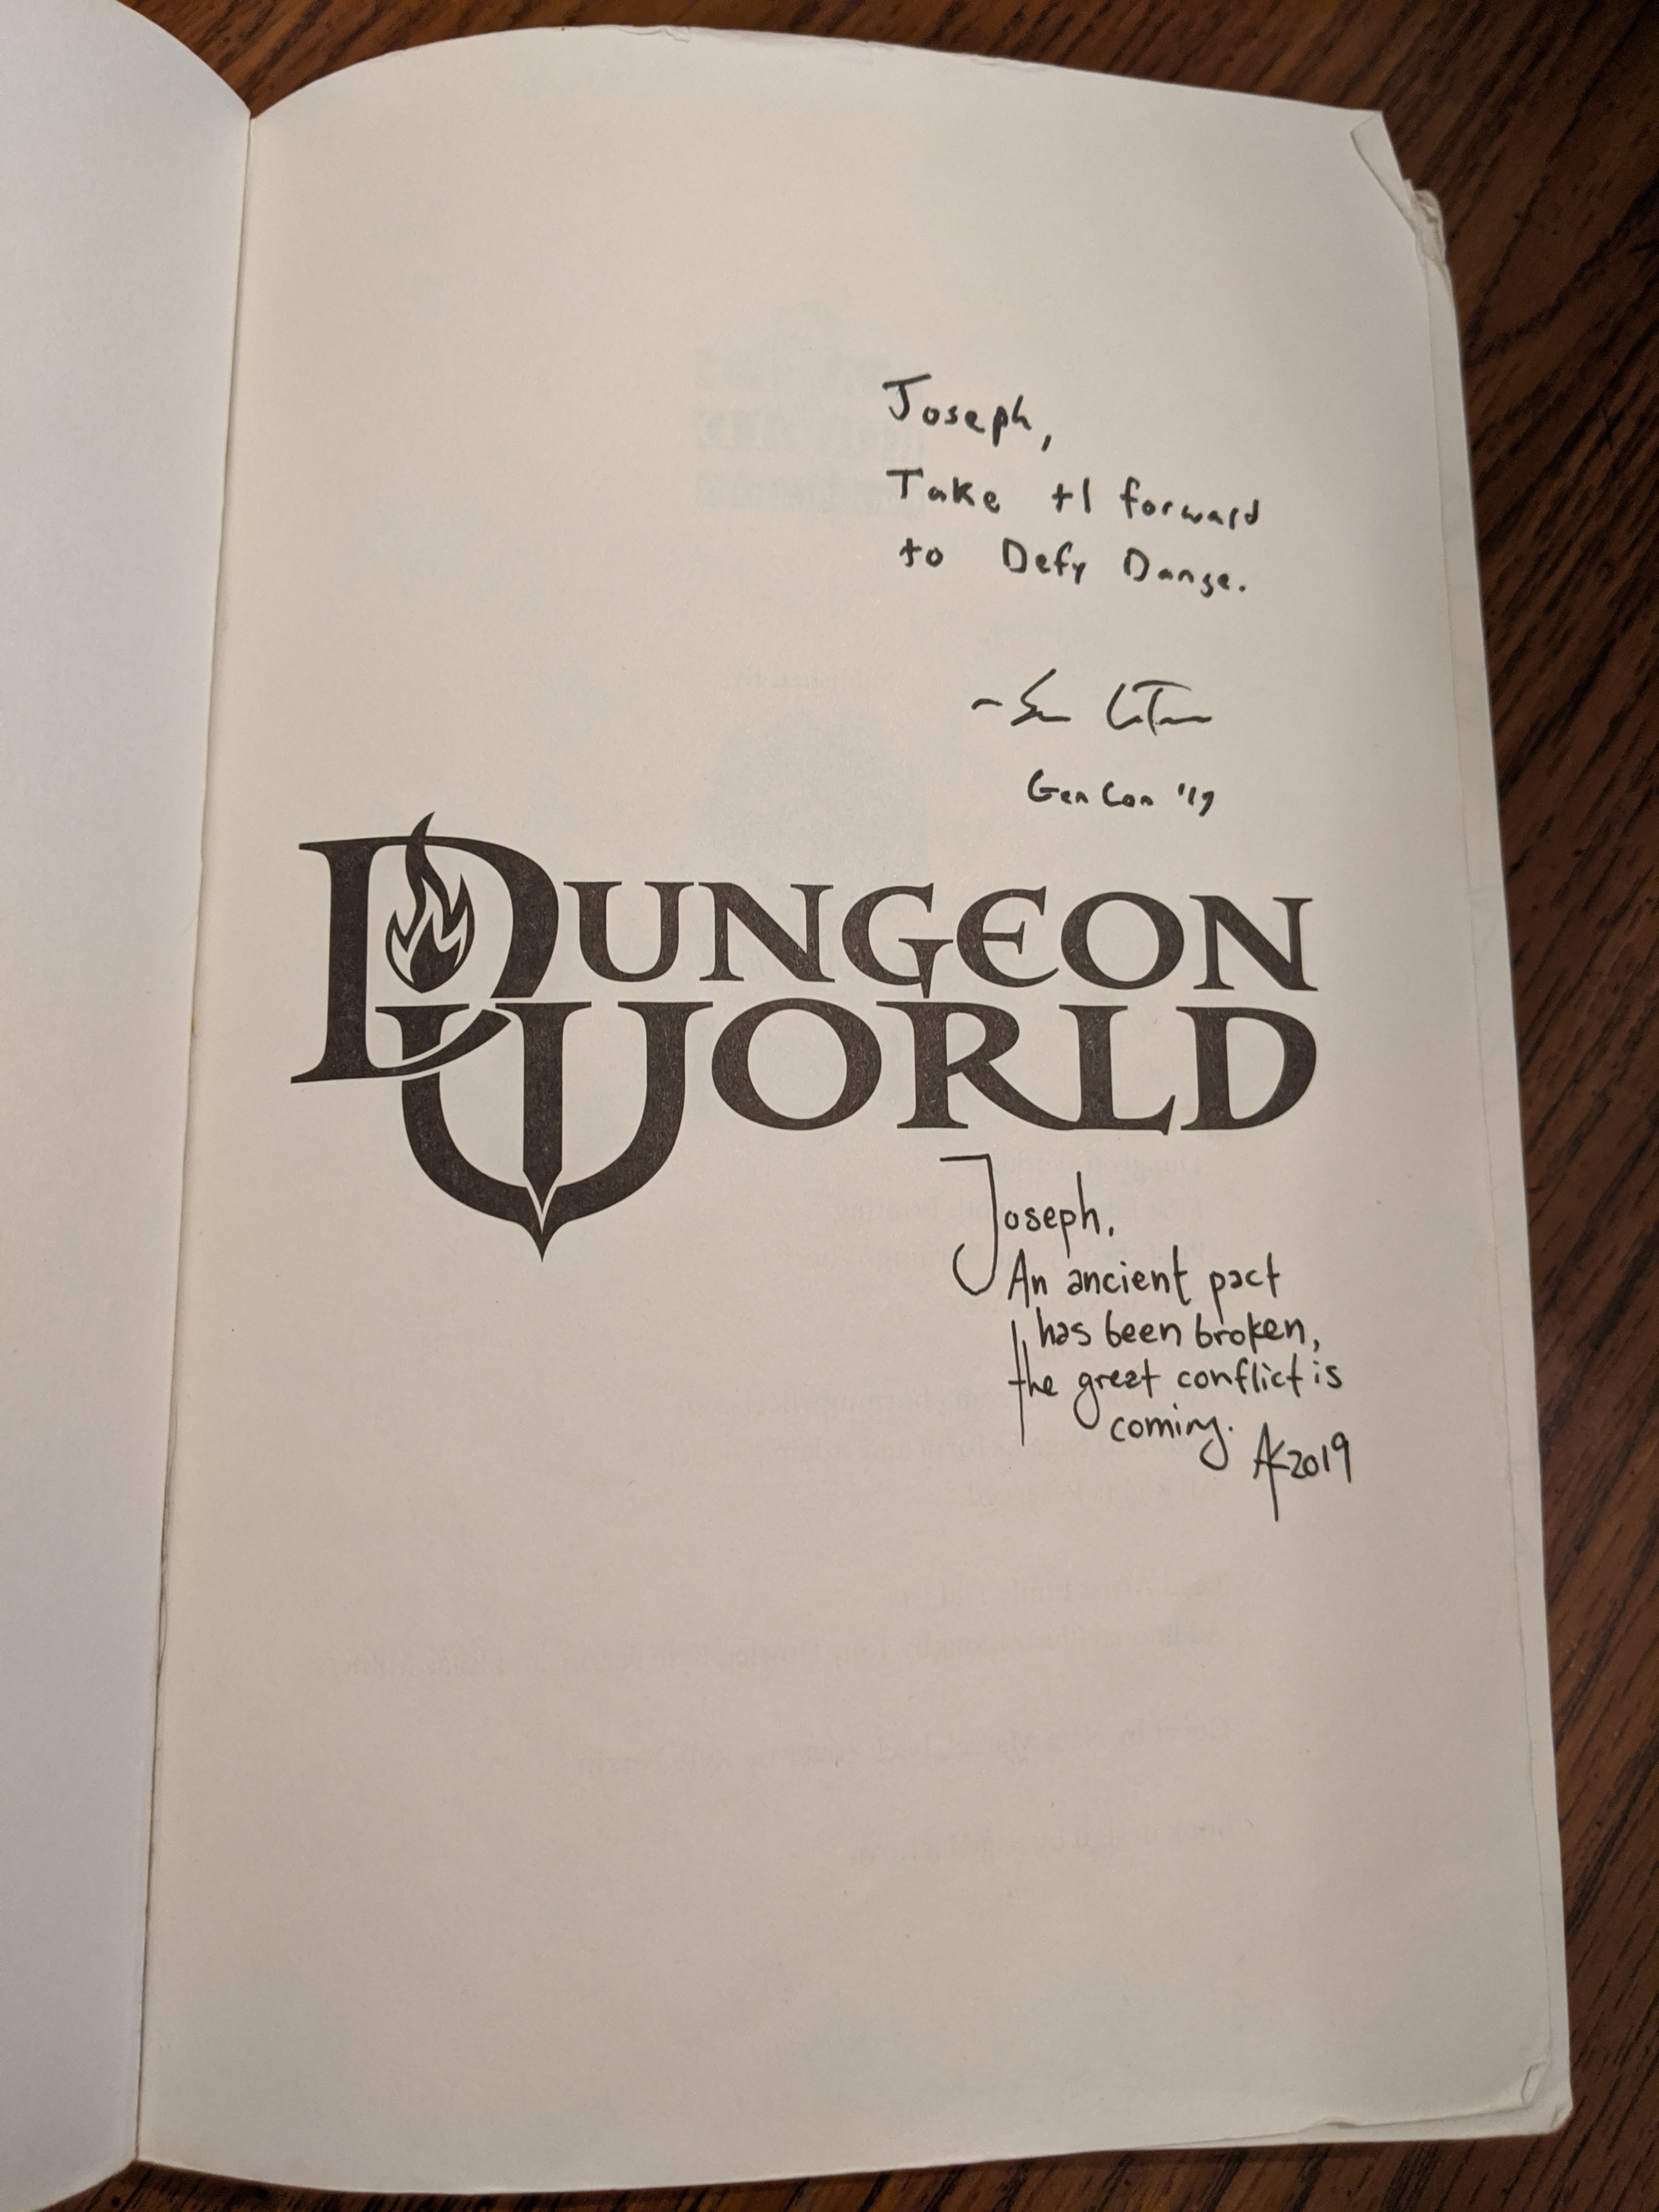 My copy of Dungeon world, signed by authors Adam Koebel and Sage LaTorra